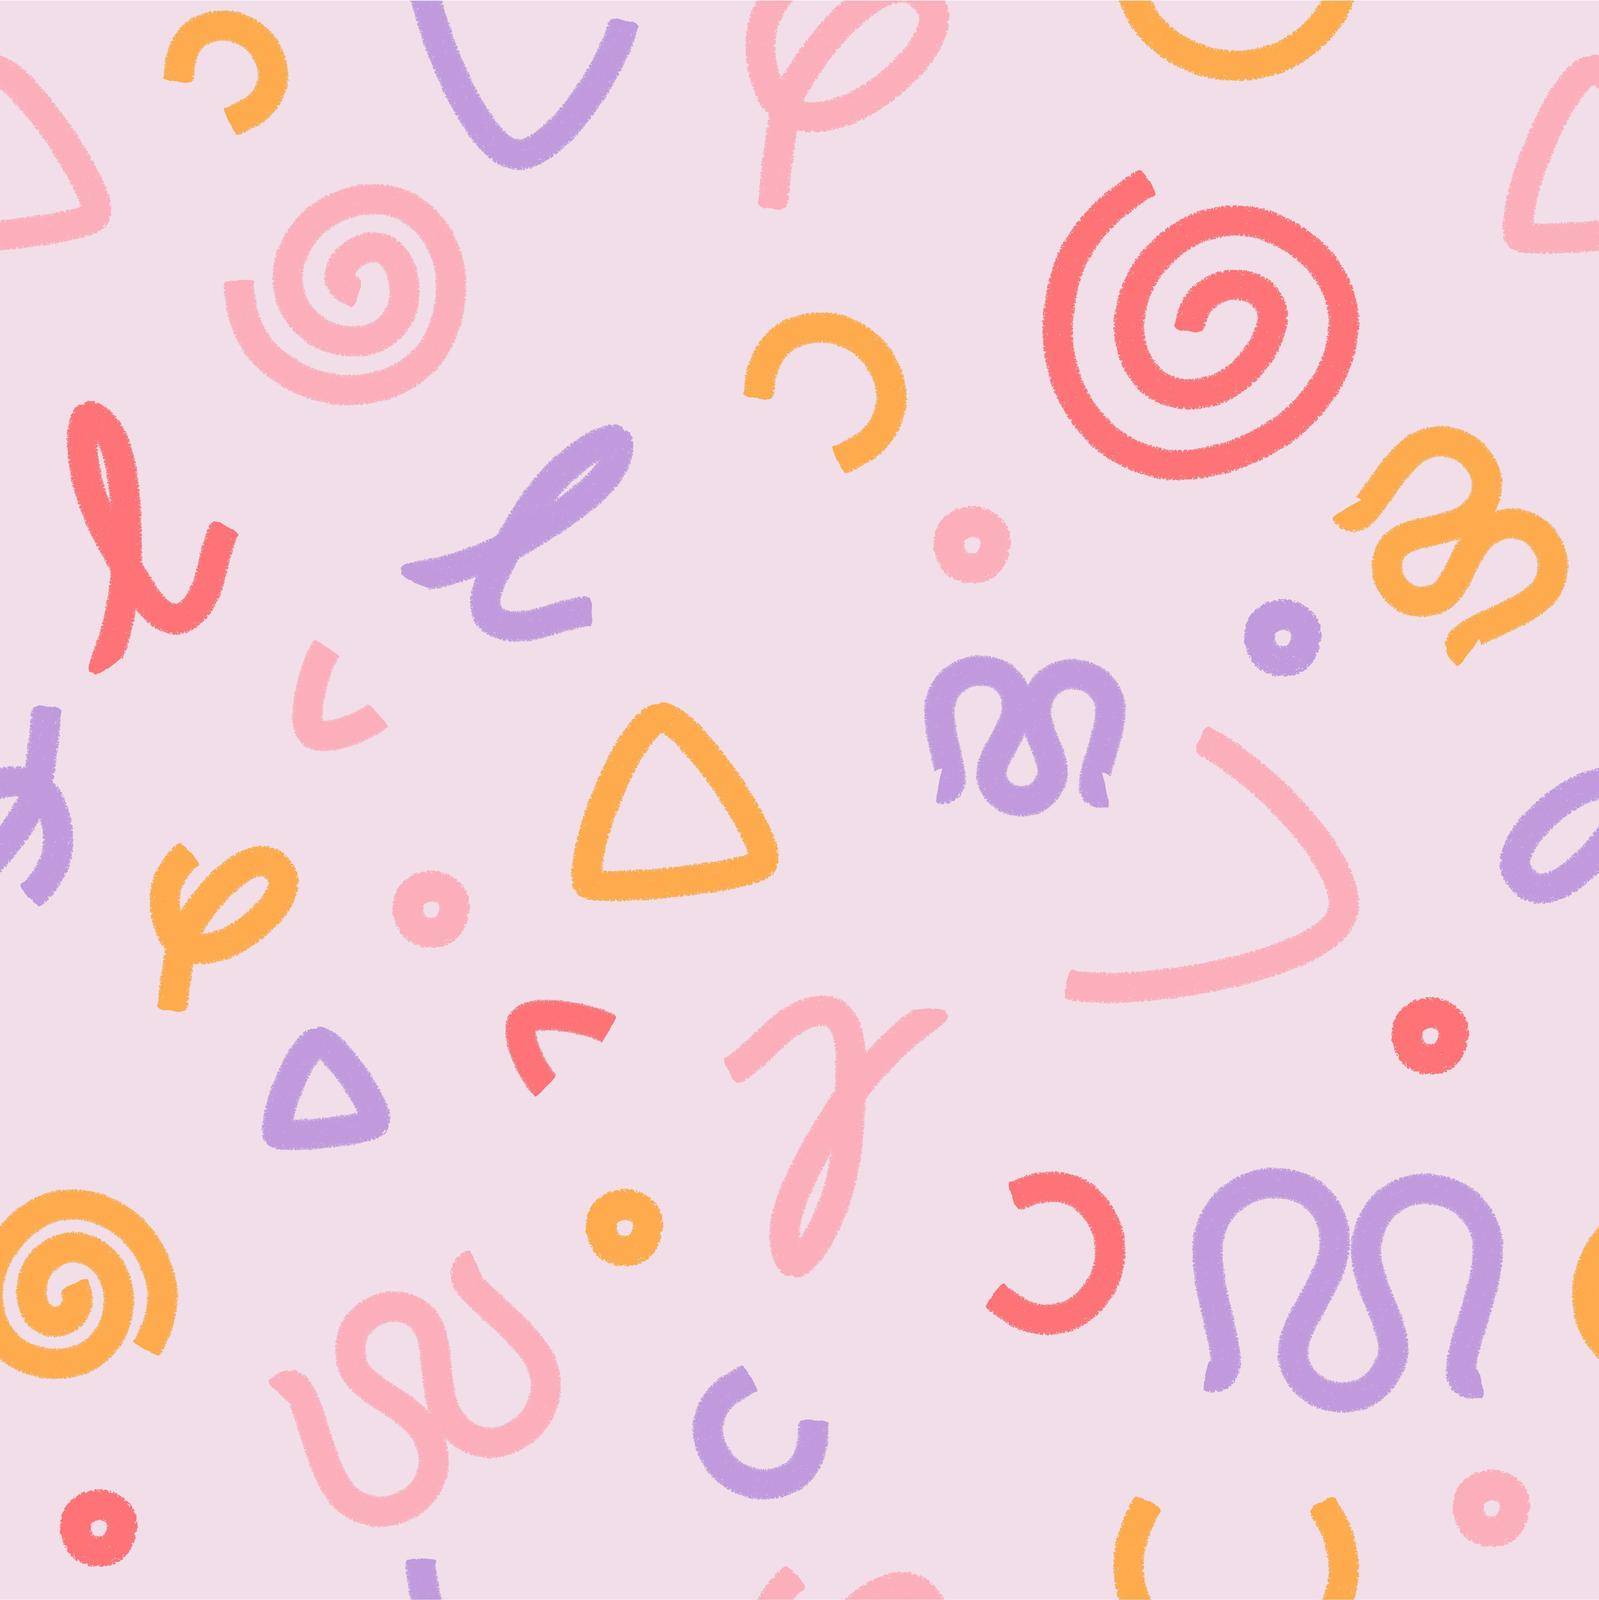 Adorable pinkish seamless pattern in pastel colors by Severost